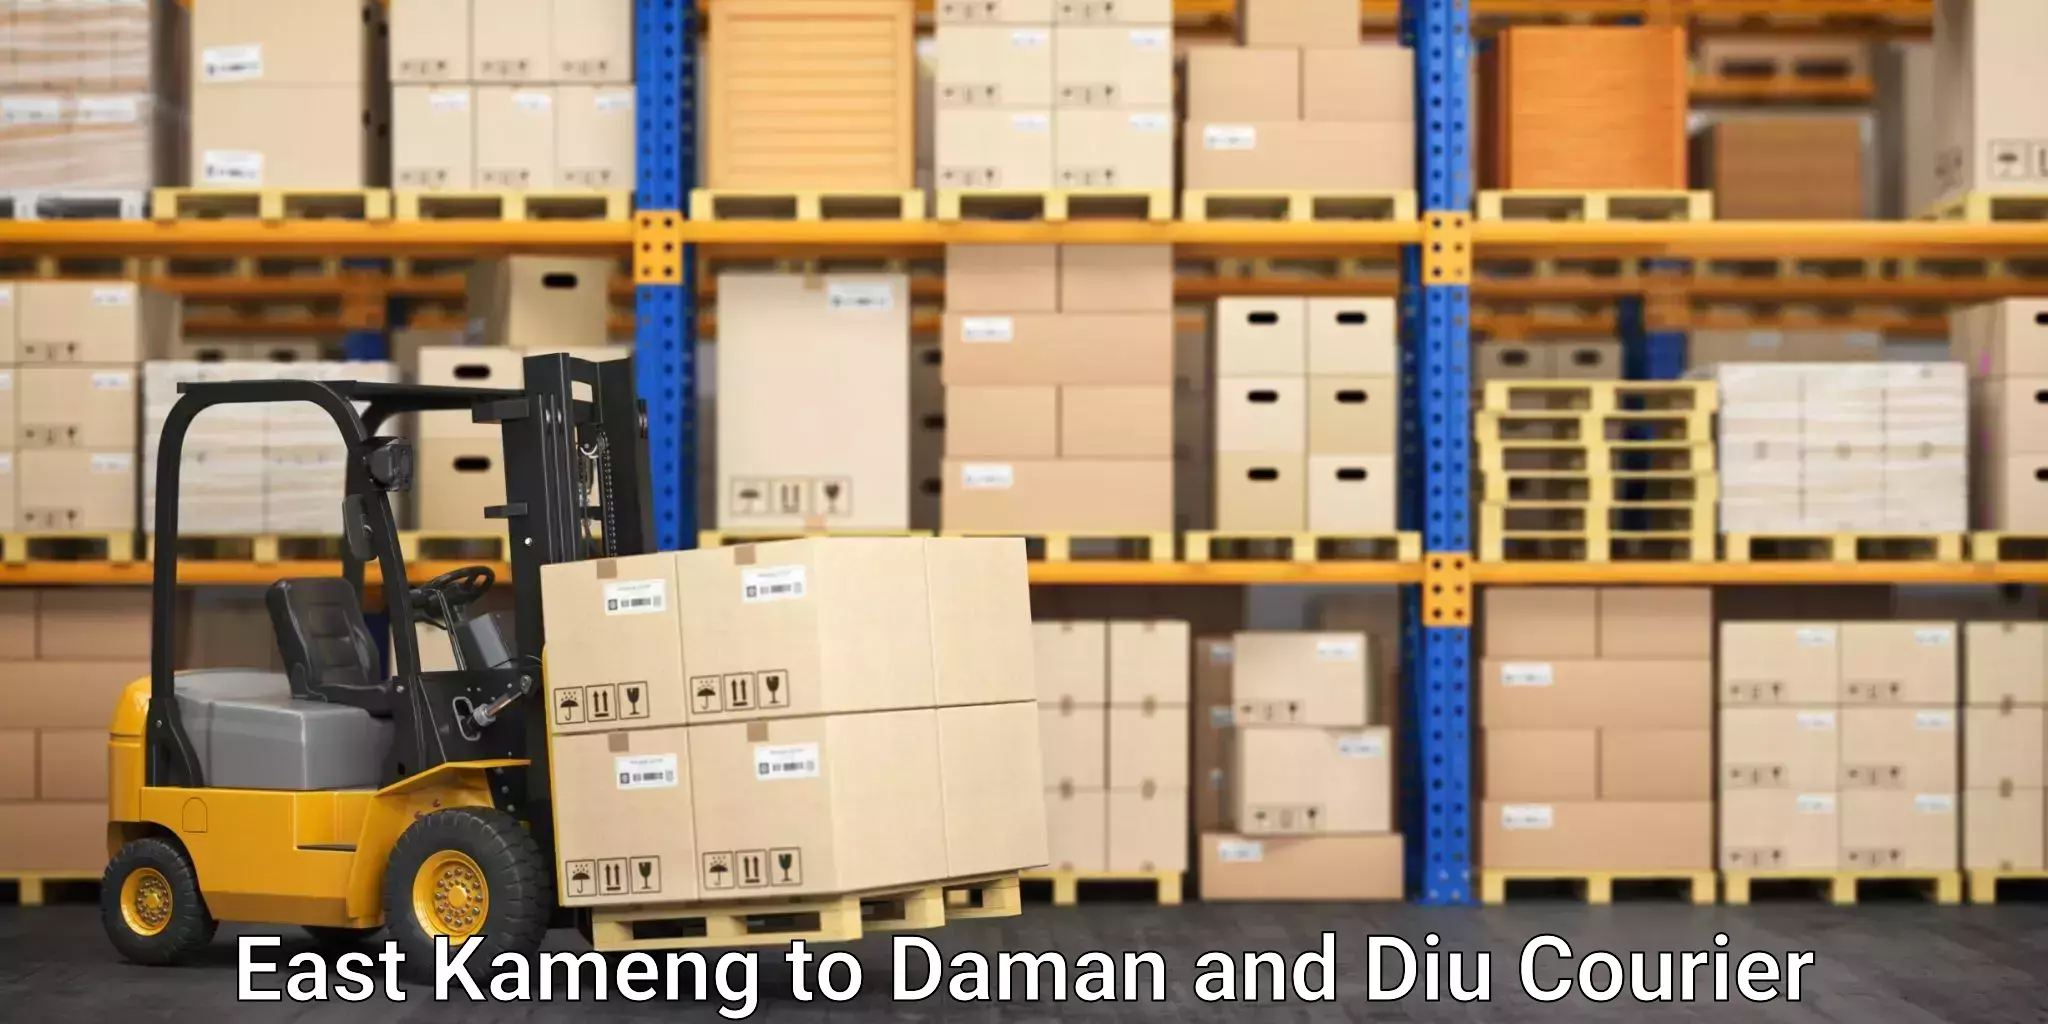 Secure freight services in East Kameng to Daman and Diu